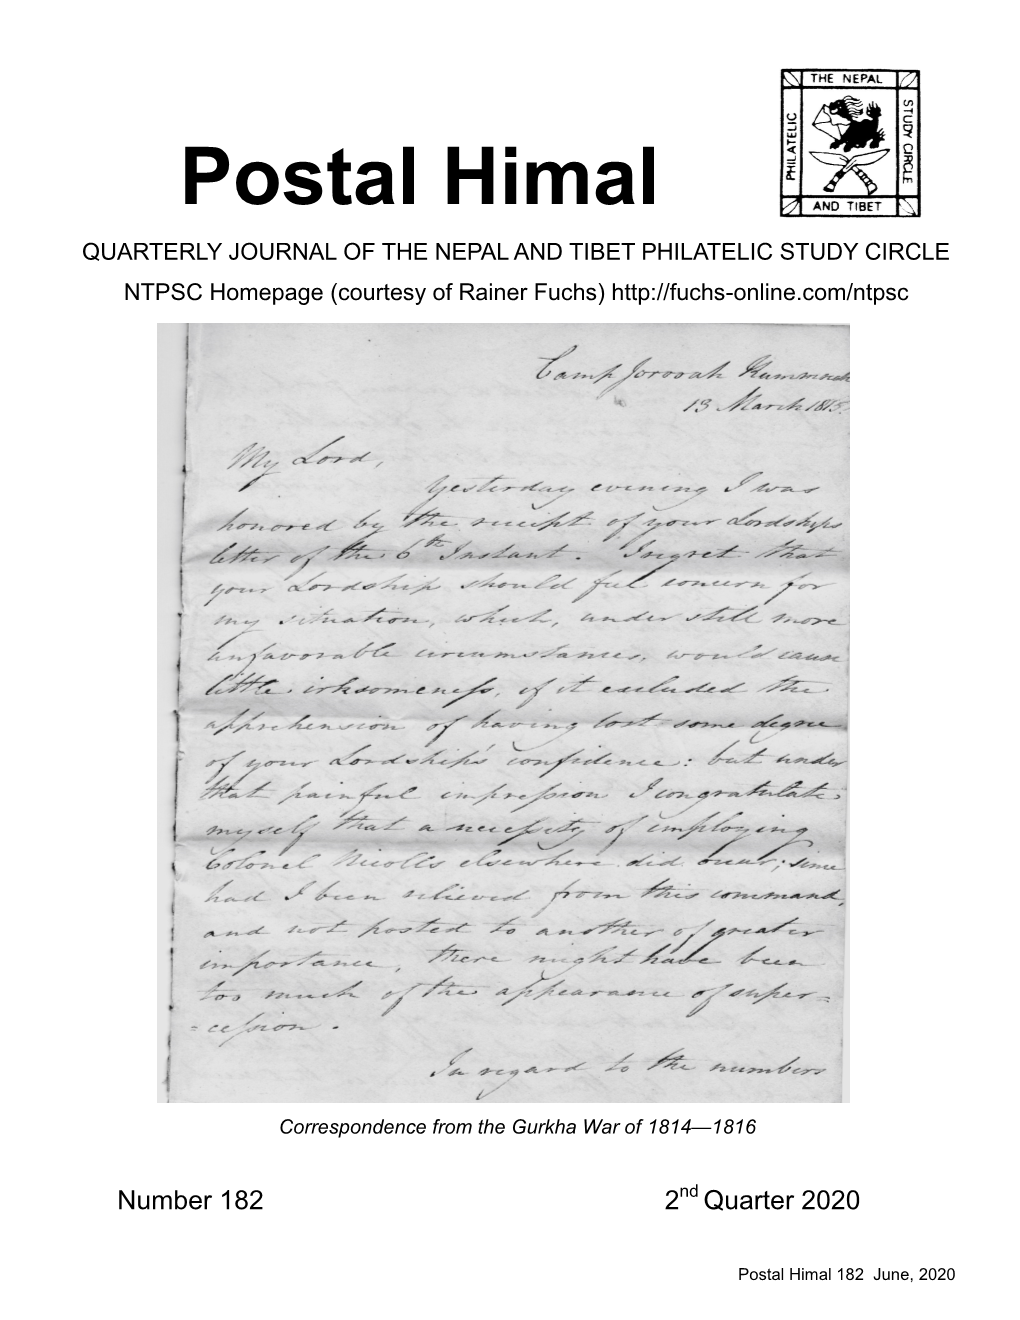 Postal Himal QUARTERLY JOURNAL of the NEPAL and TIBET PHILATELIC STUDY CIRCLE NTPSC Homepage (Courtesy of Rainer Fuchs)